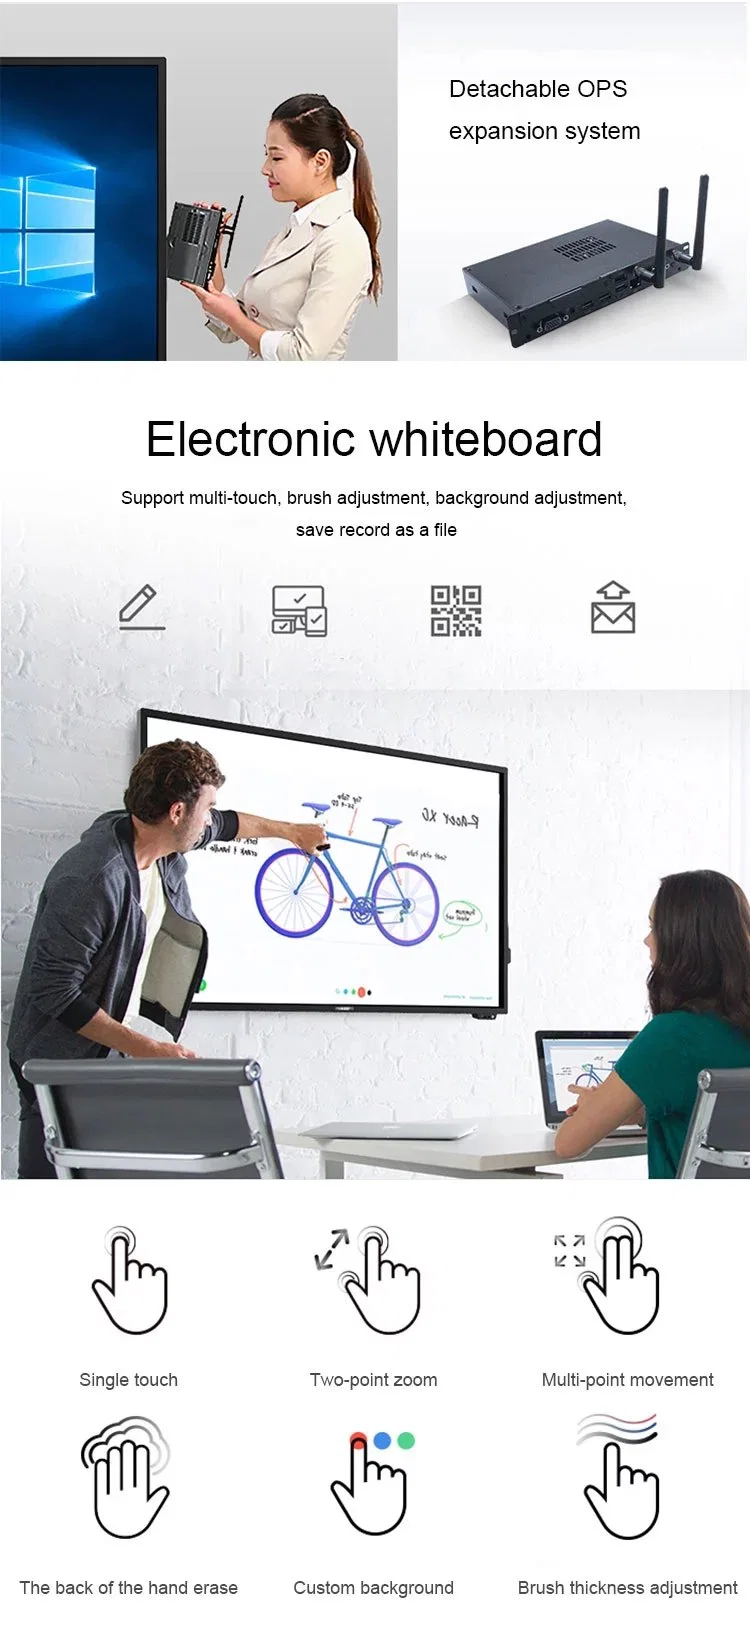 LED Touch Computer Touch Screen Interactive Flat Panel Smart Board Miboard Kiosk Conference Meeting Whiteboard Display LCD Screen